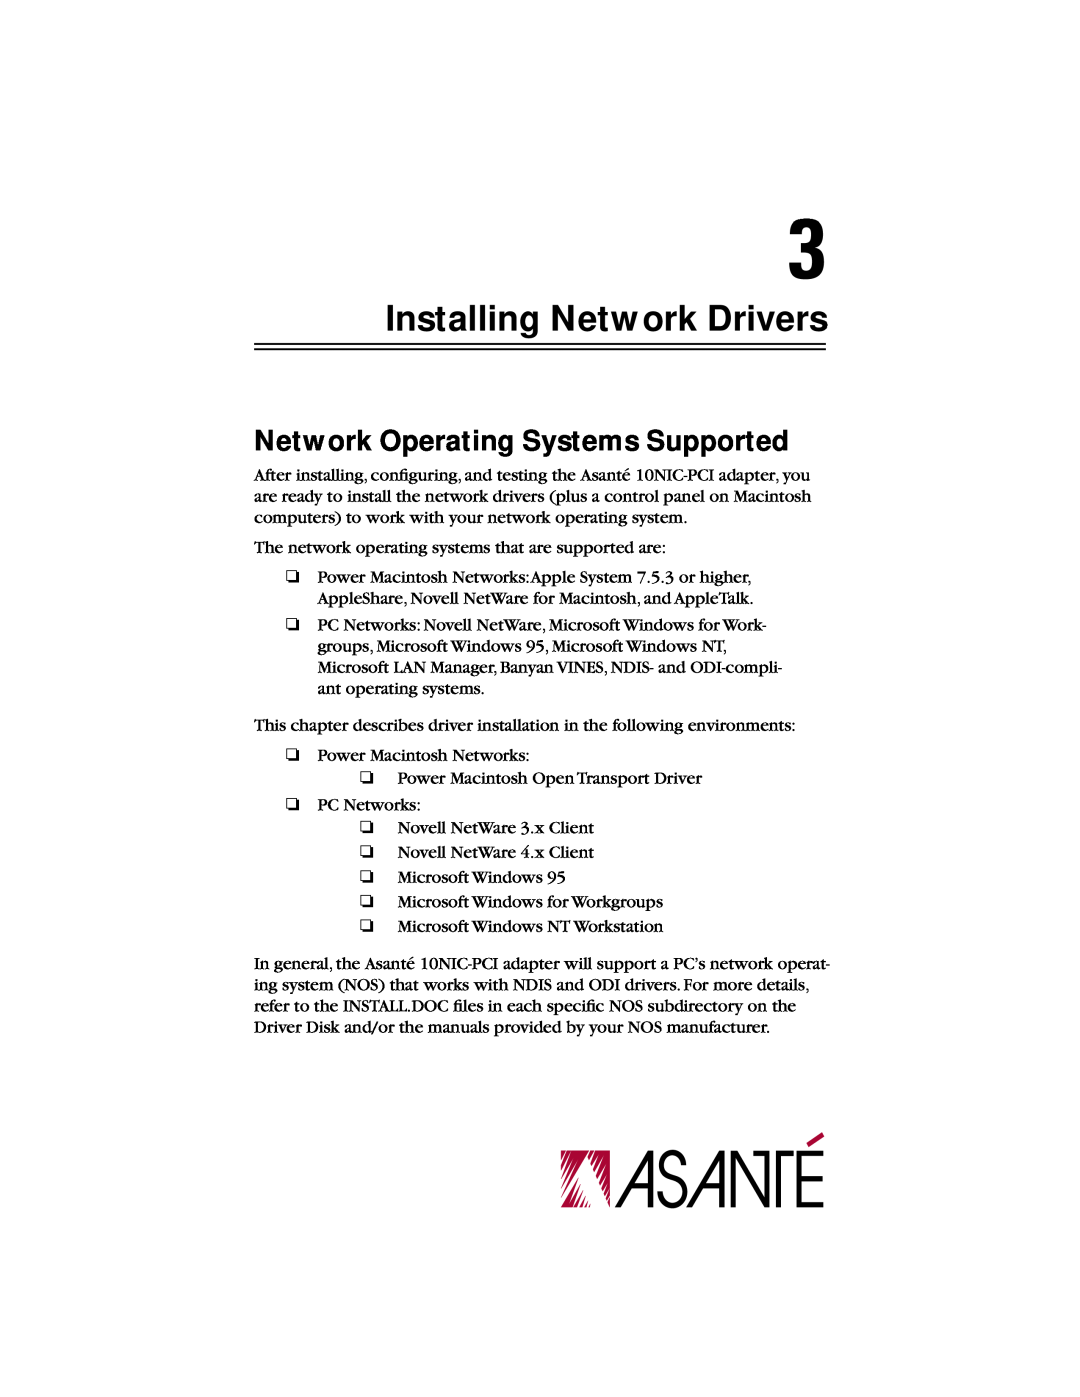 Asante Technologies 10NIC-PCITM manual Installing Network Drivers, Network Operating Systems Supported 